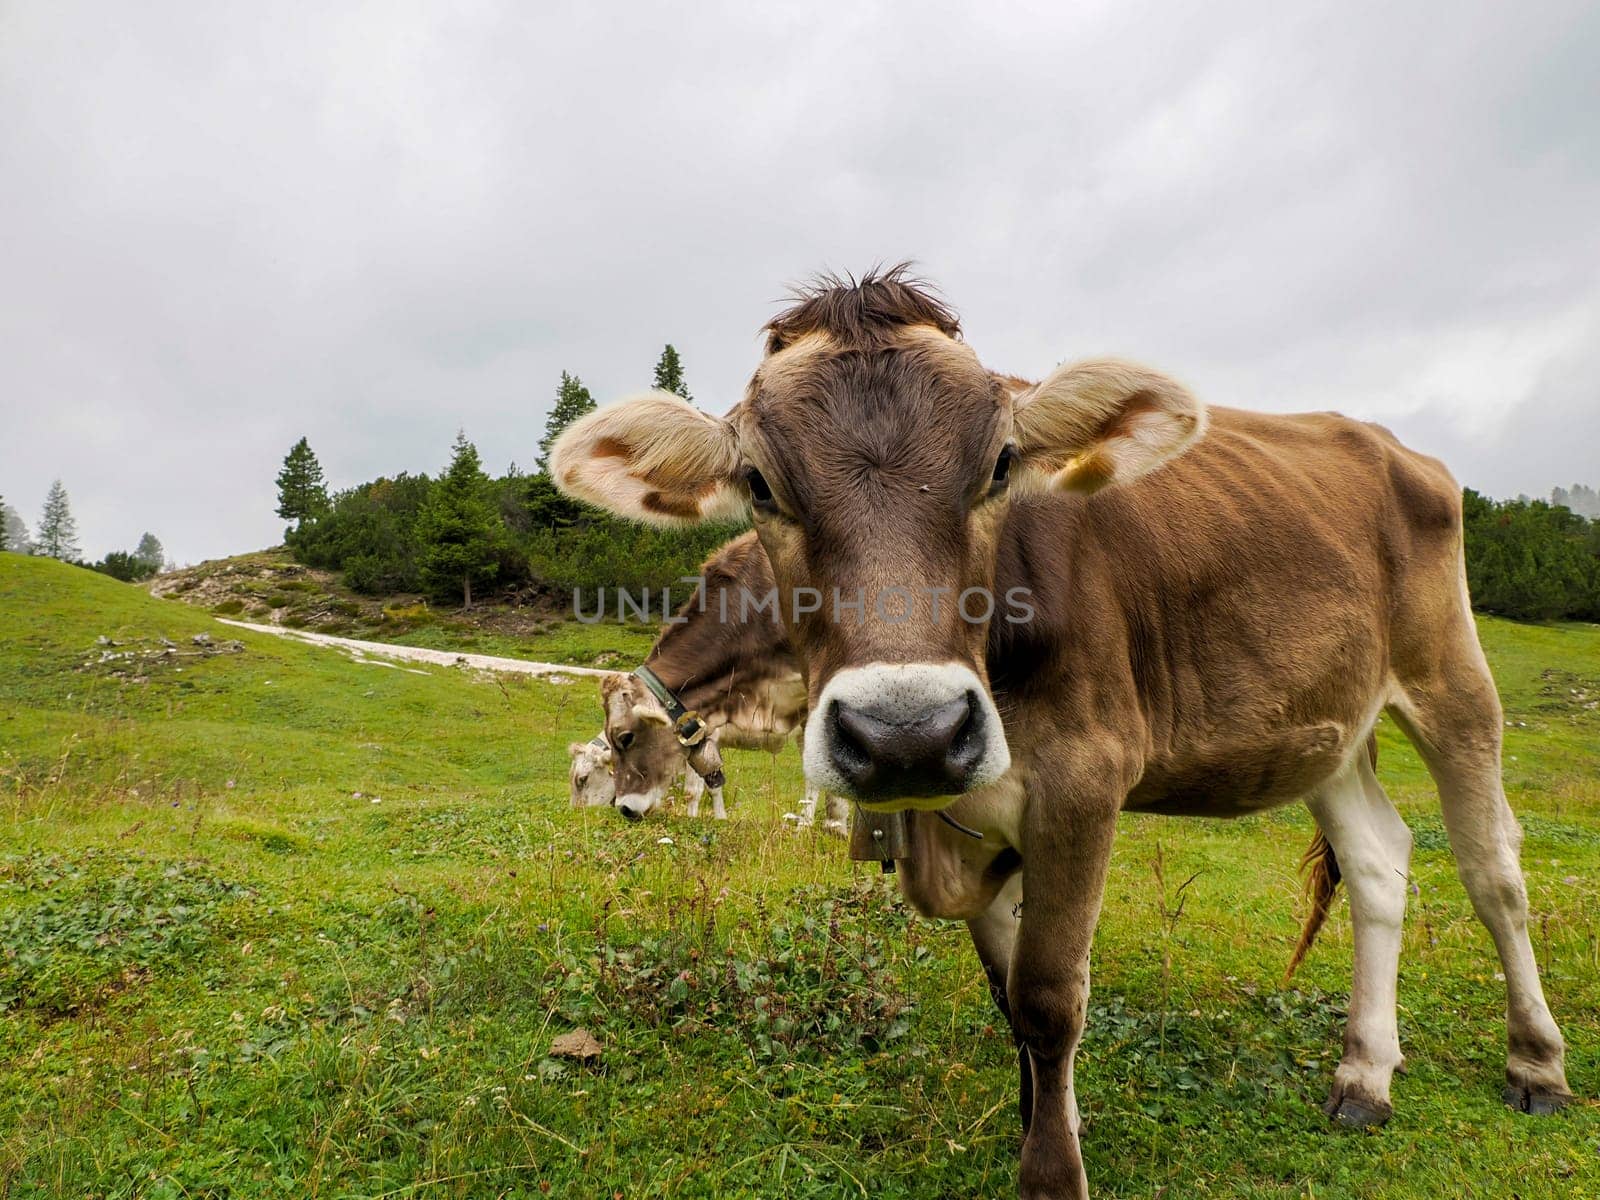 A cow relaxing on the green grass of Dolomites mountains, a breathtaking mountain range in northern Italy.